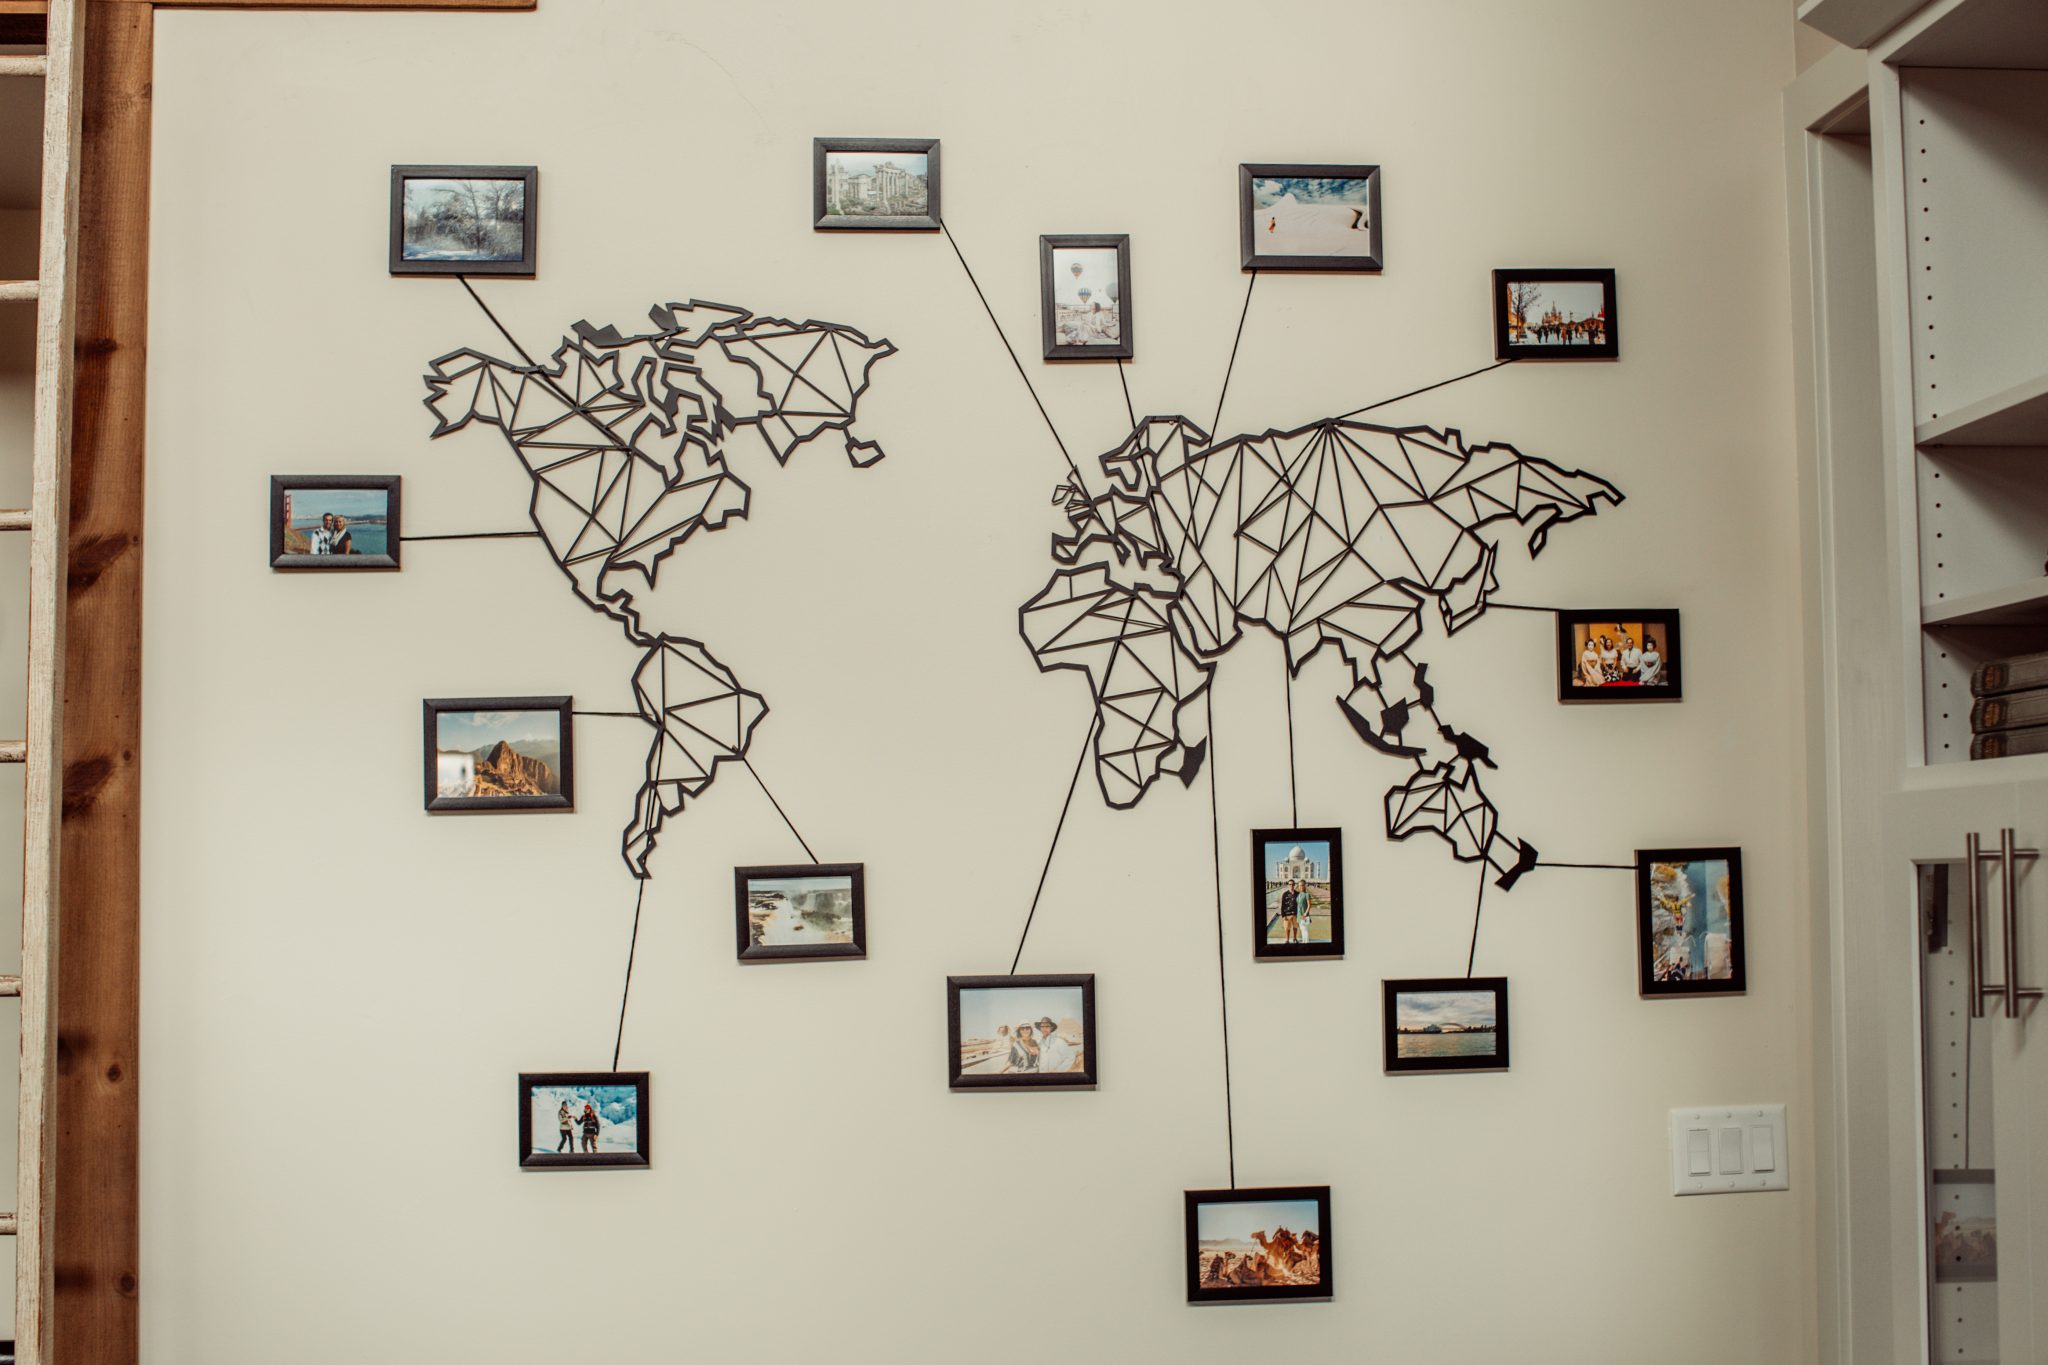 Travel Wall Ideas – How to Display Travel Photos & More!